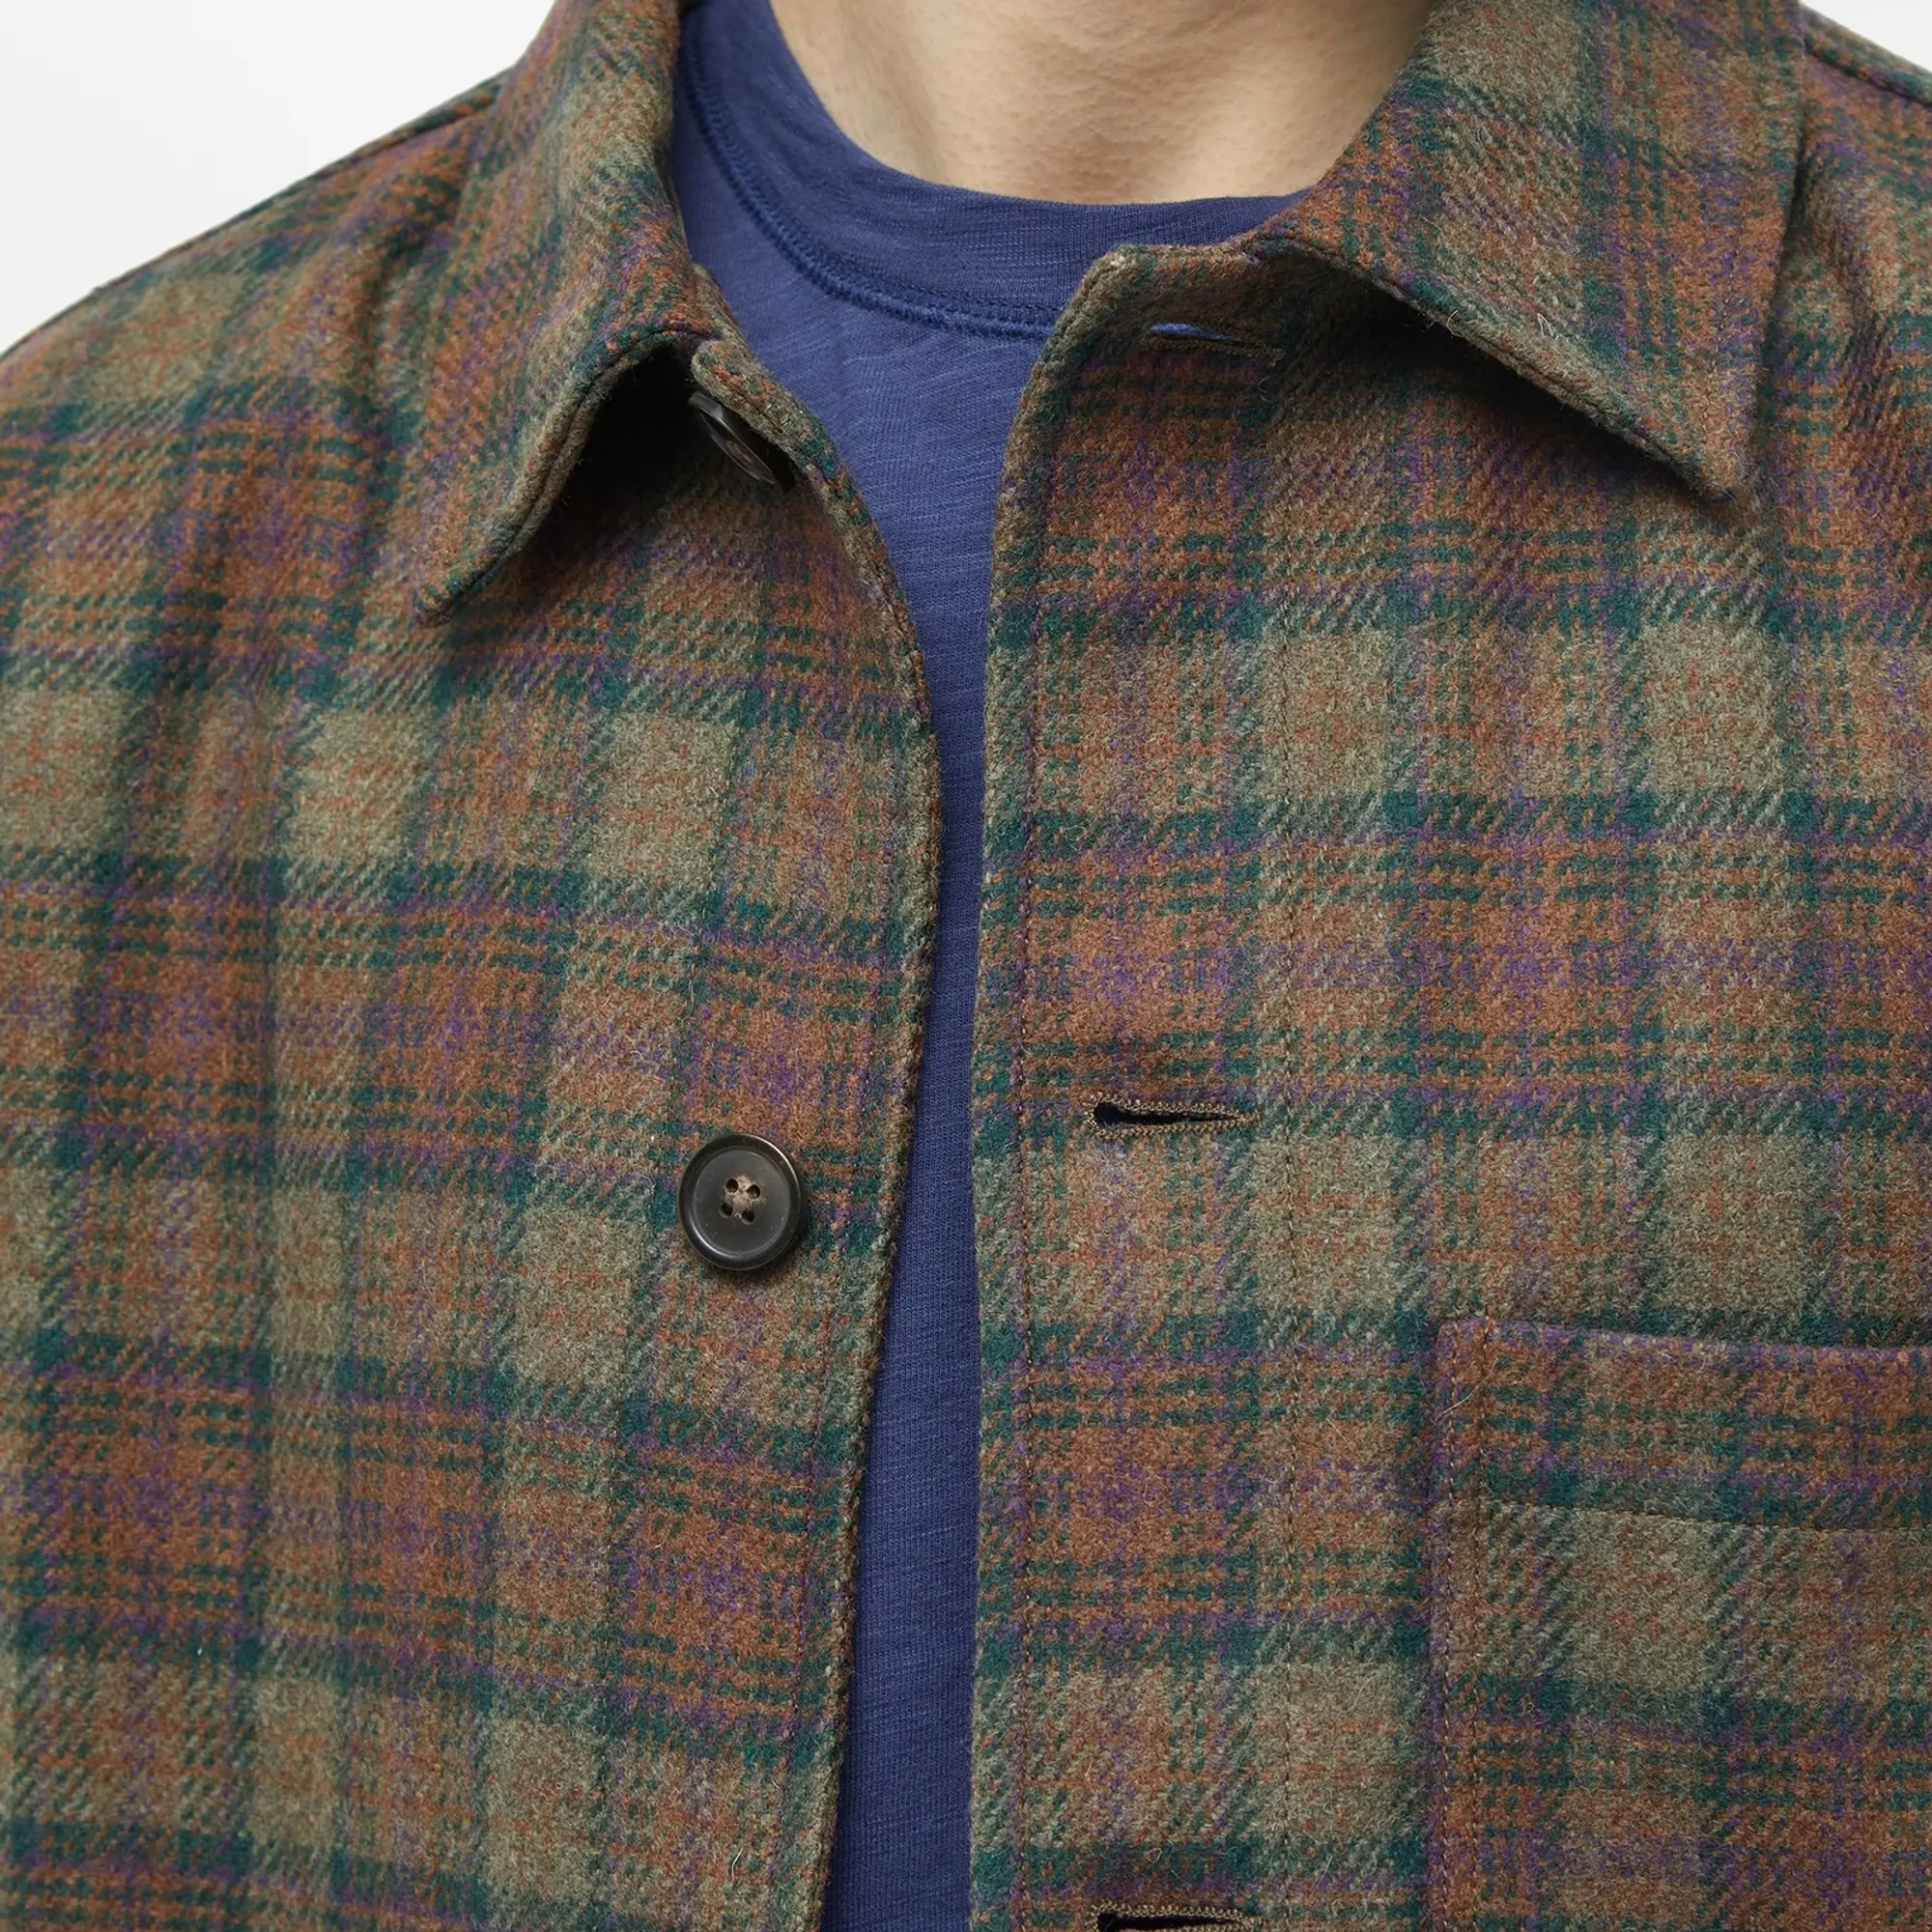 A.P.C. Men's Emile Checked Wool Chore Jacket Brown